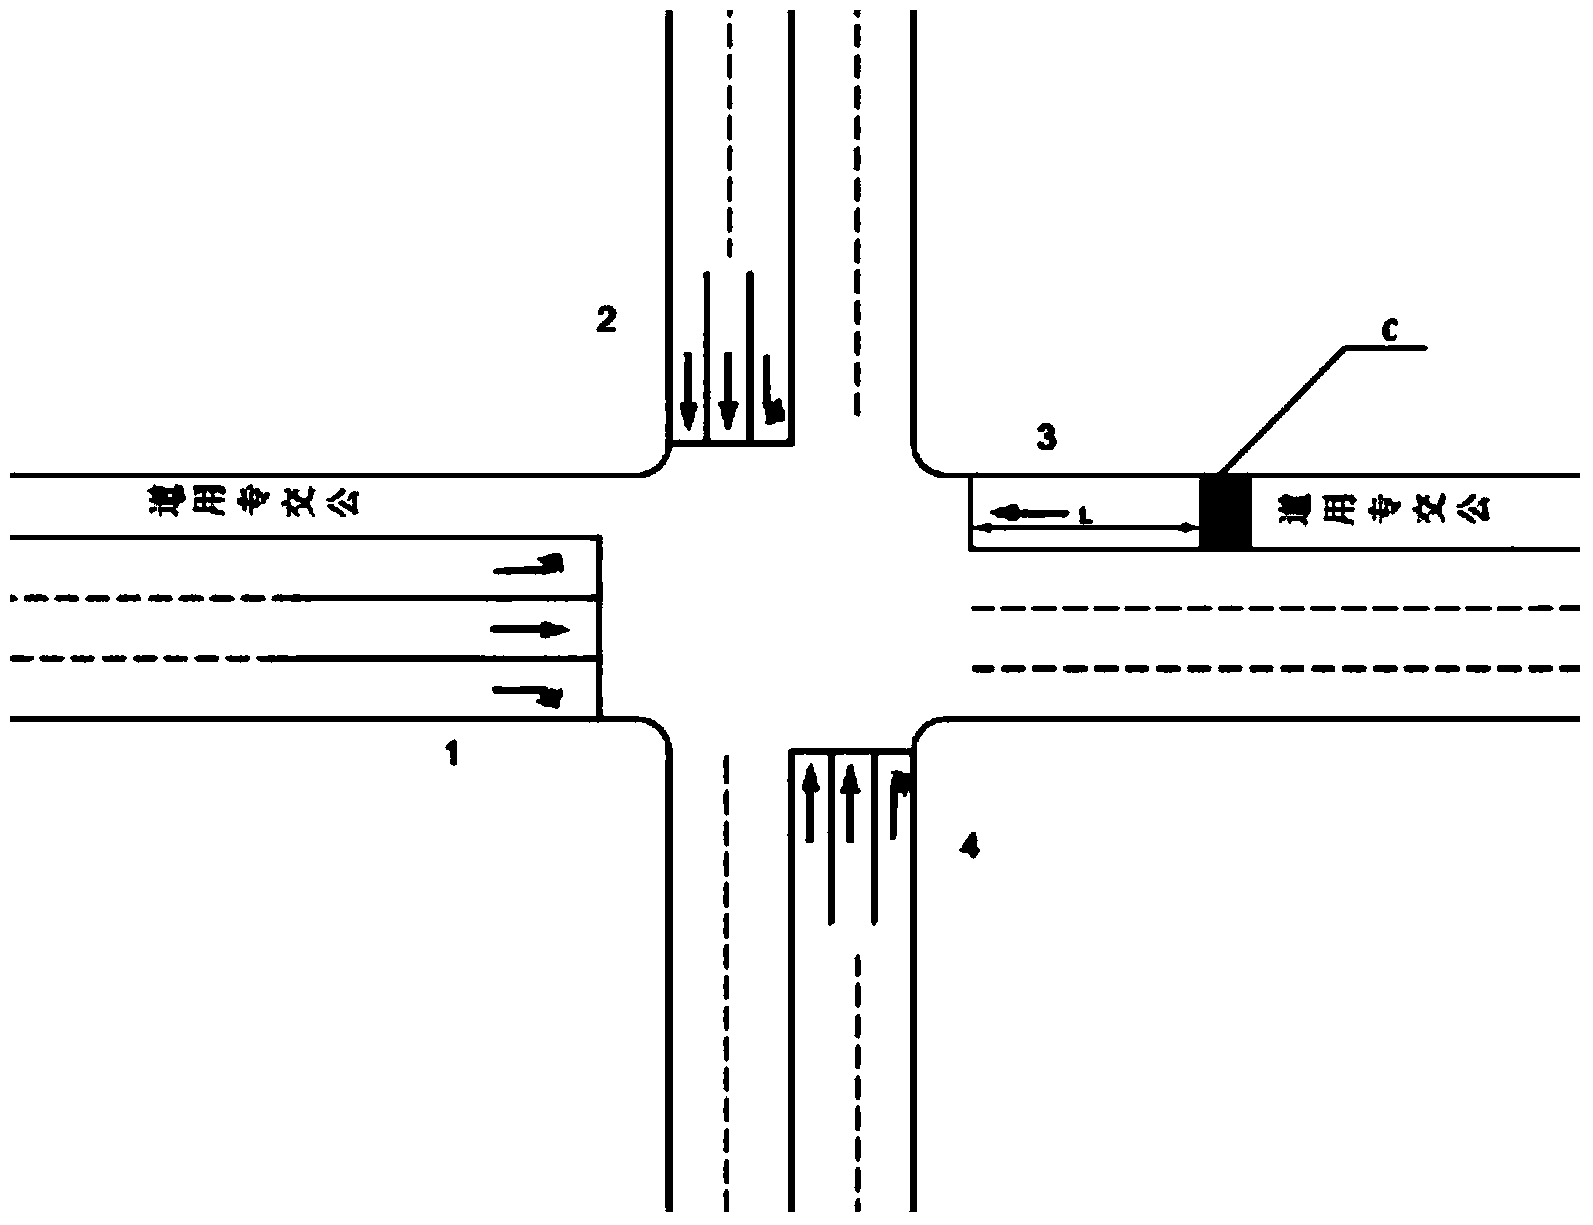 Method for optimizing crossing of two-way road and one-way road with reverse bus transportation lane